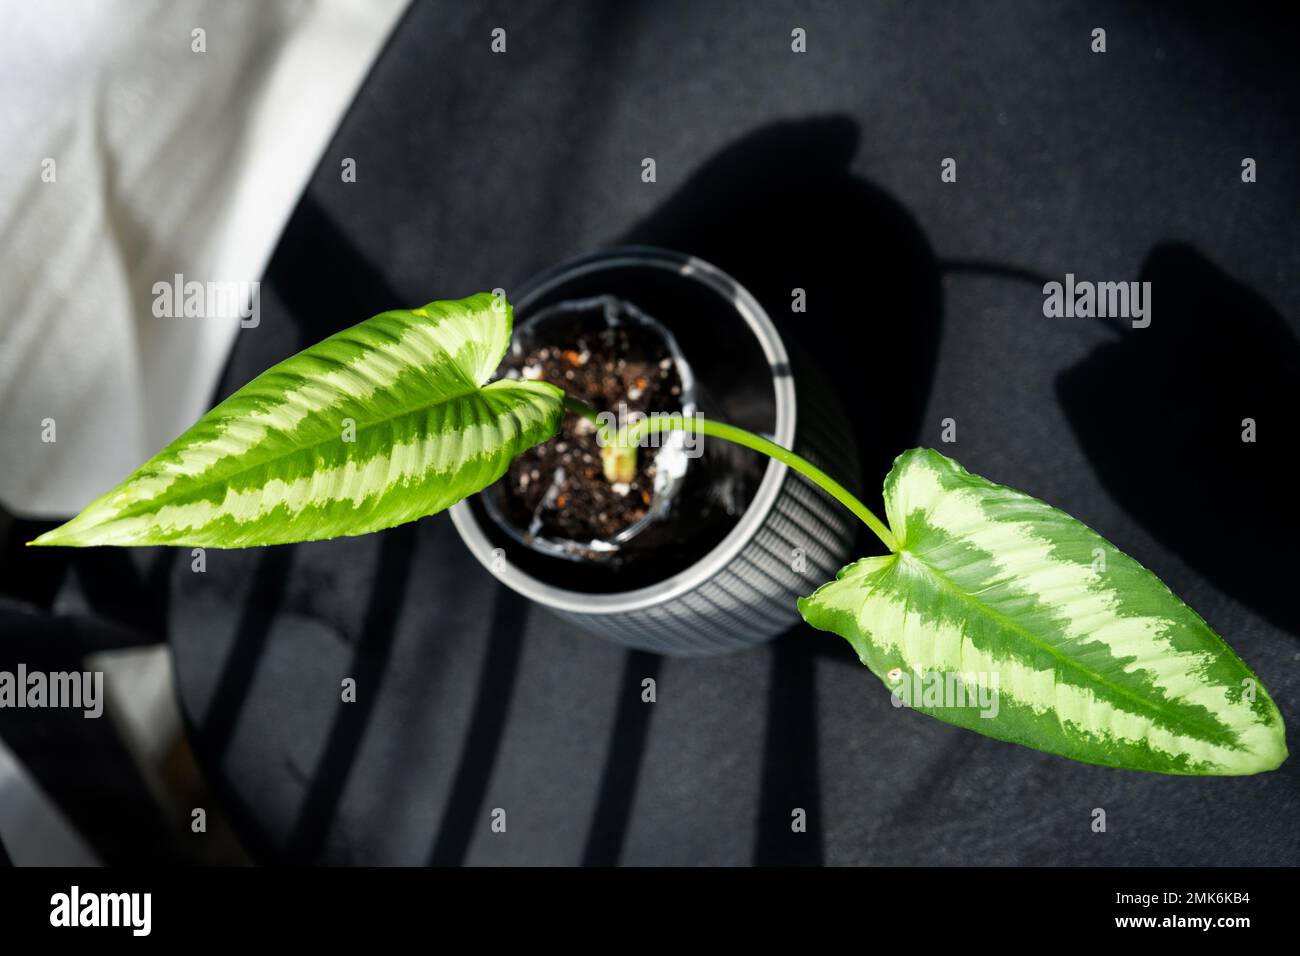 A rare houseplant Schismatoglottis, interior and aquarium, moisture-loving tropical plant. Breeding and growing of demanding potted plants and for res Stock Photo